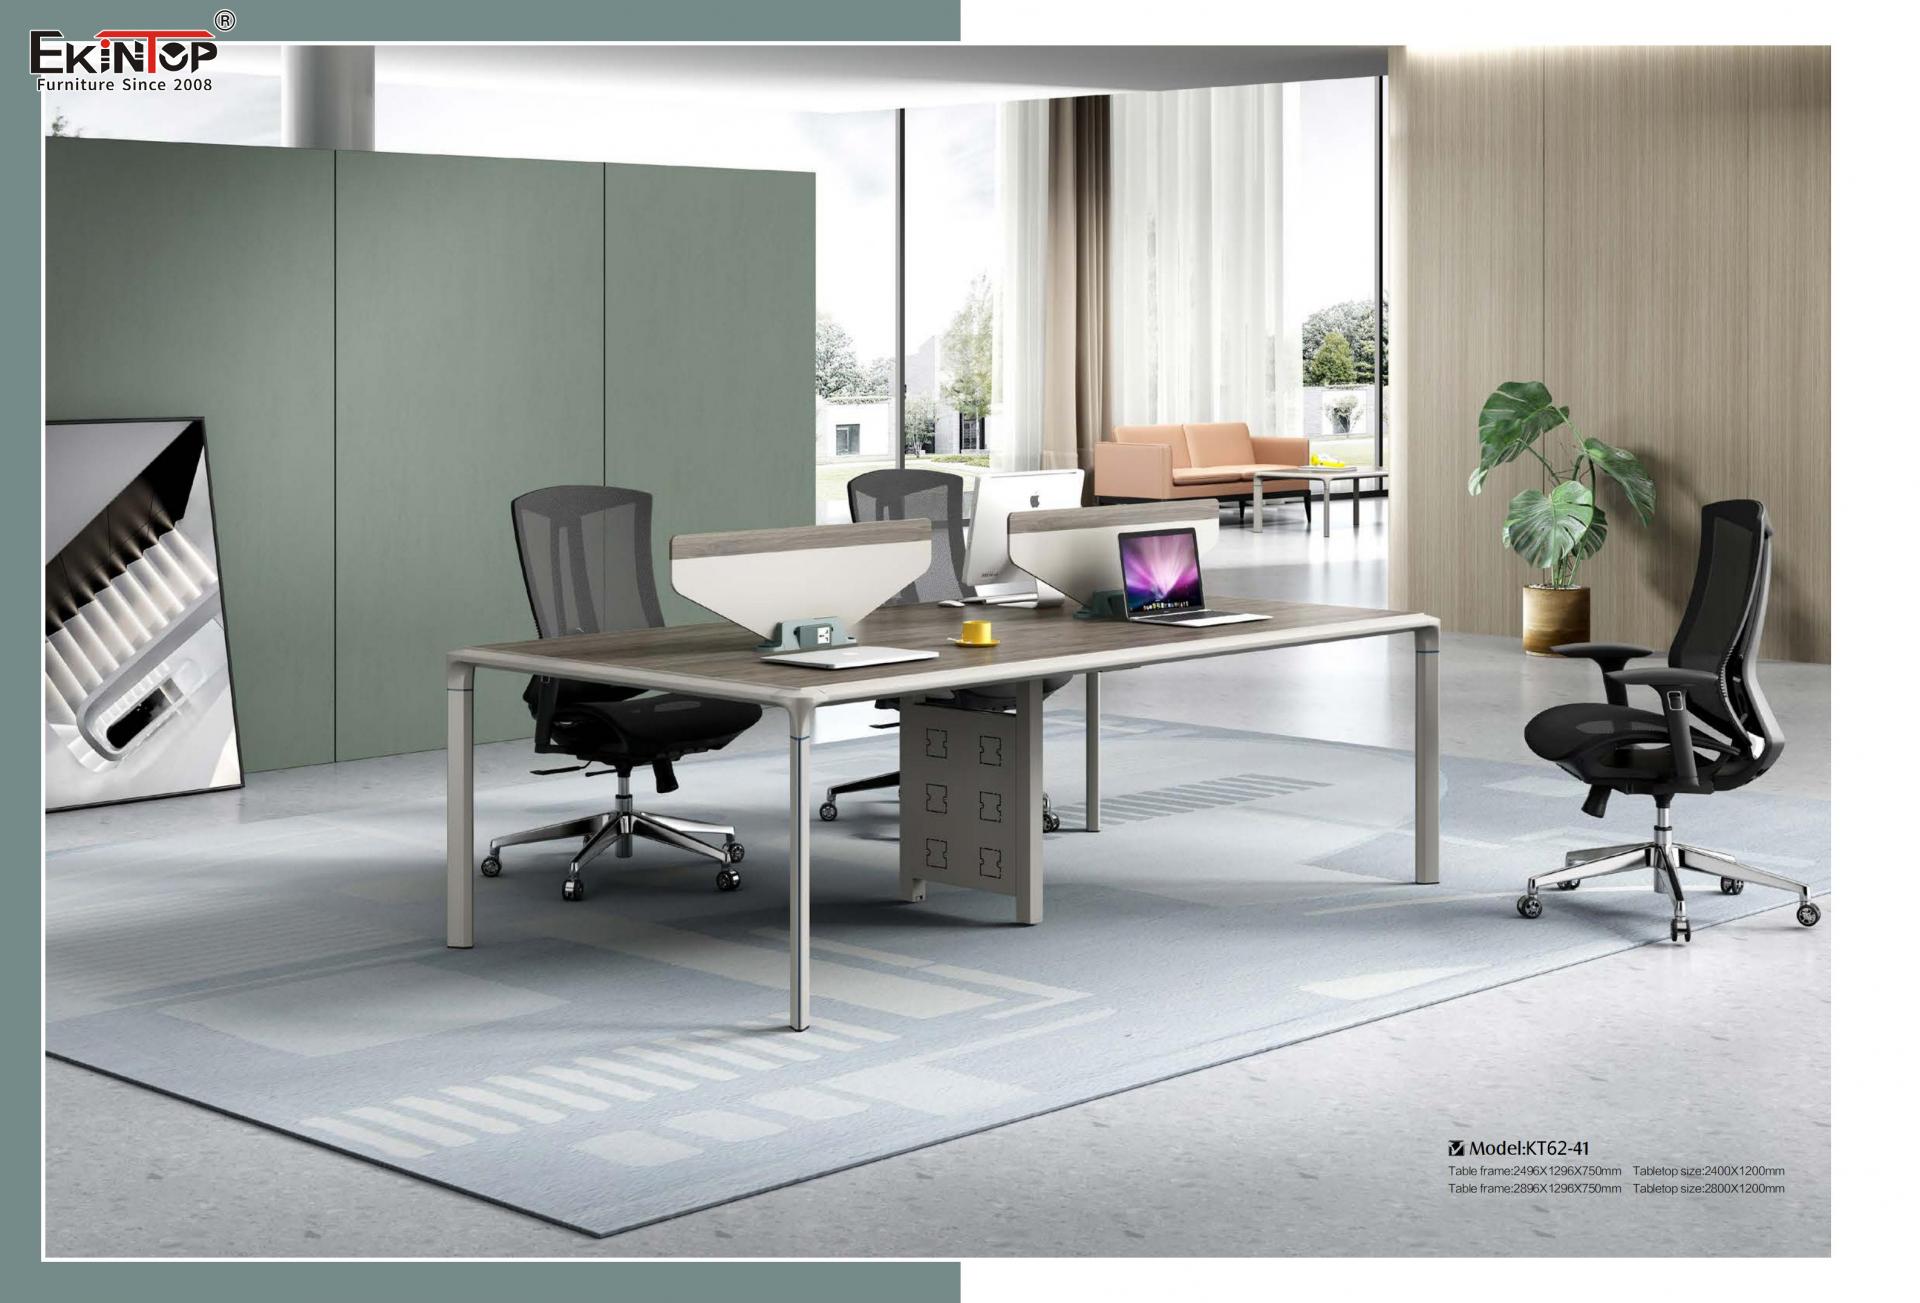 What are the styles of purchasing modern glass office desk